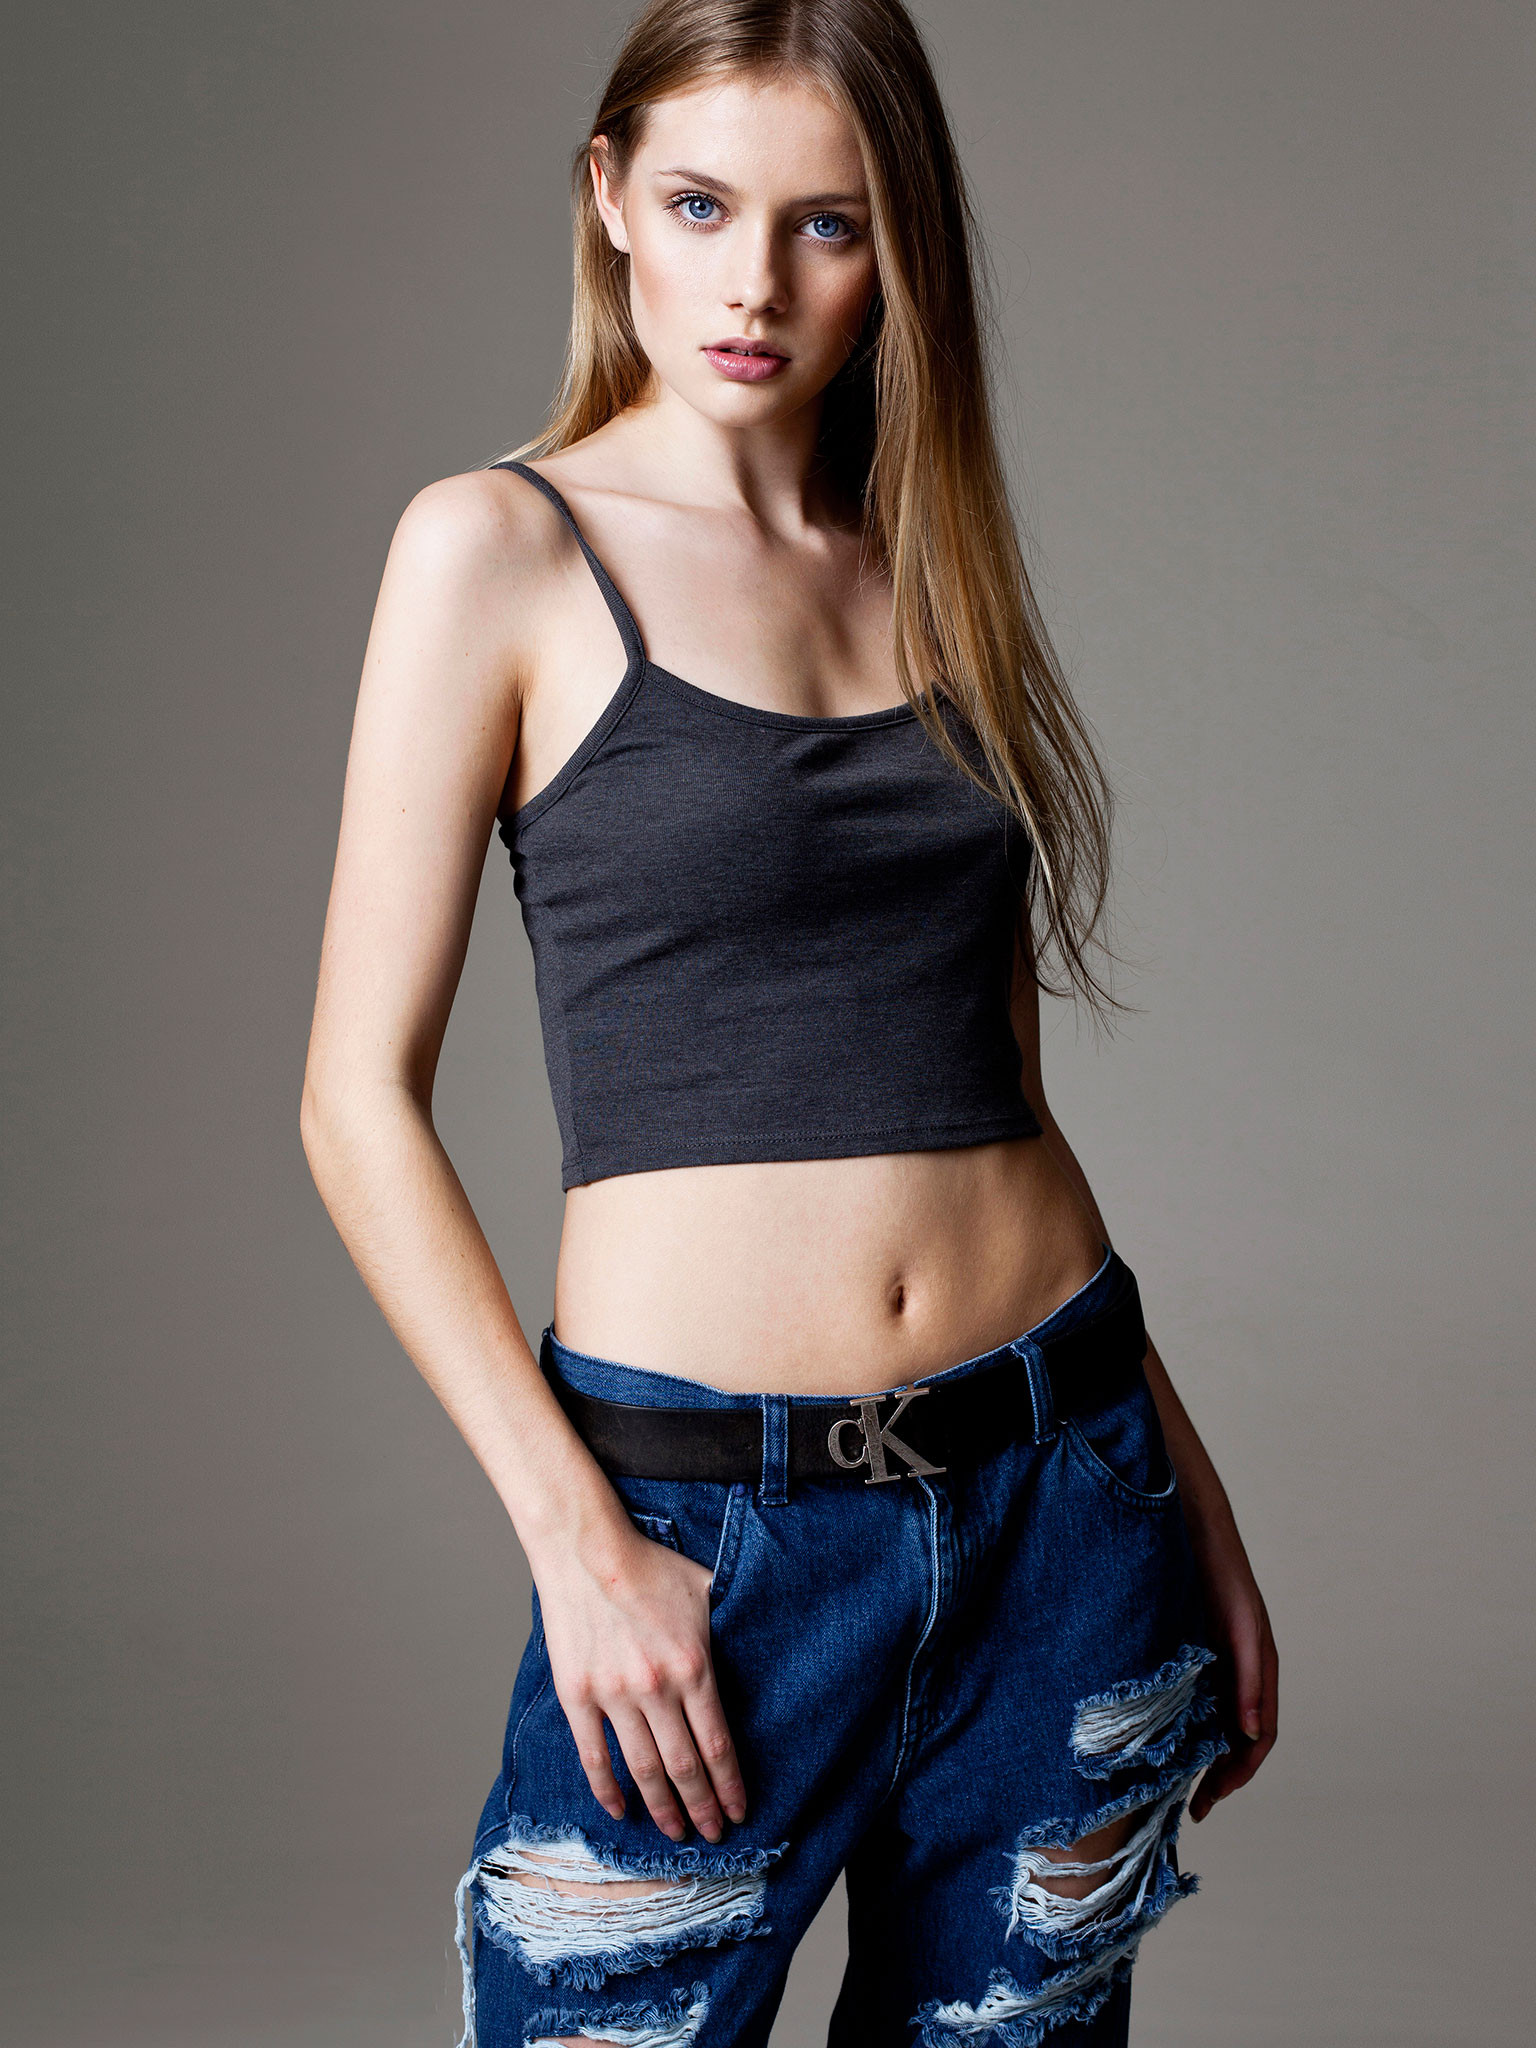 Photo of fashion model Jessica Towner - ID 499116 | Models | The FMD